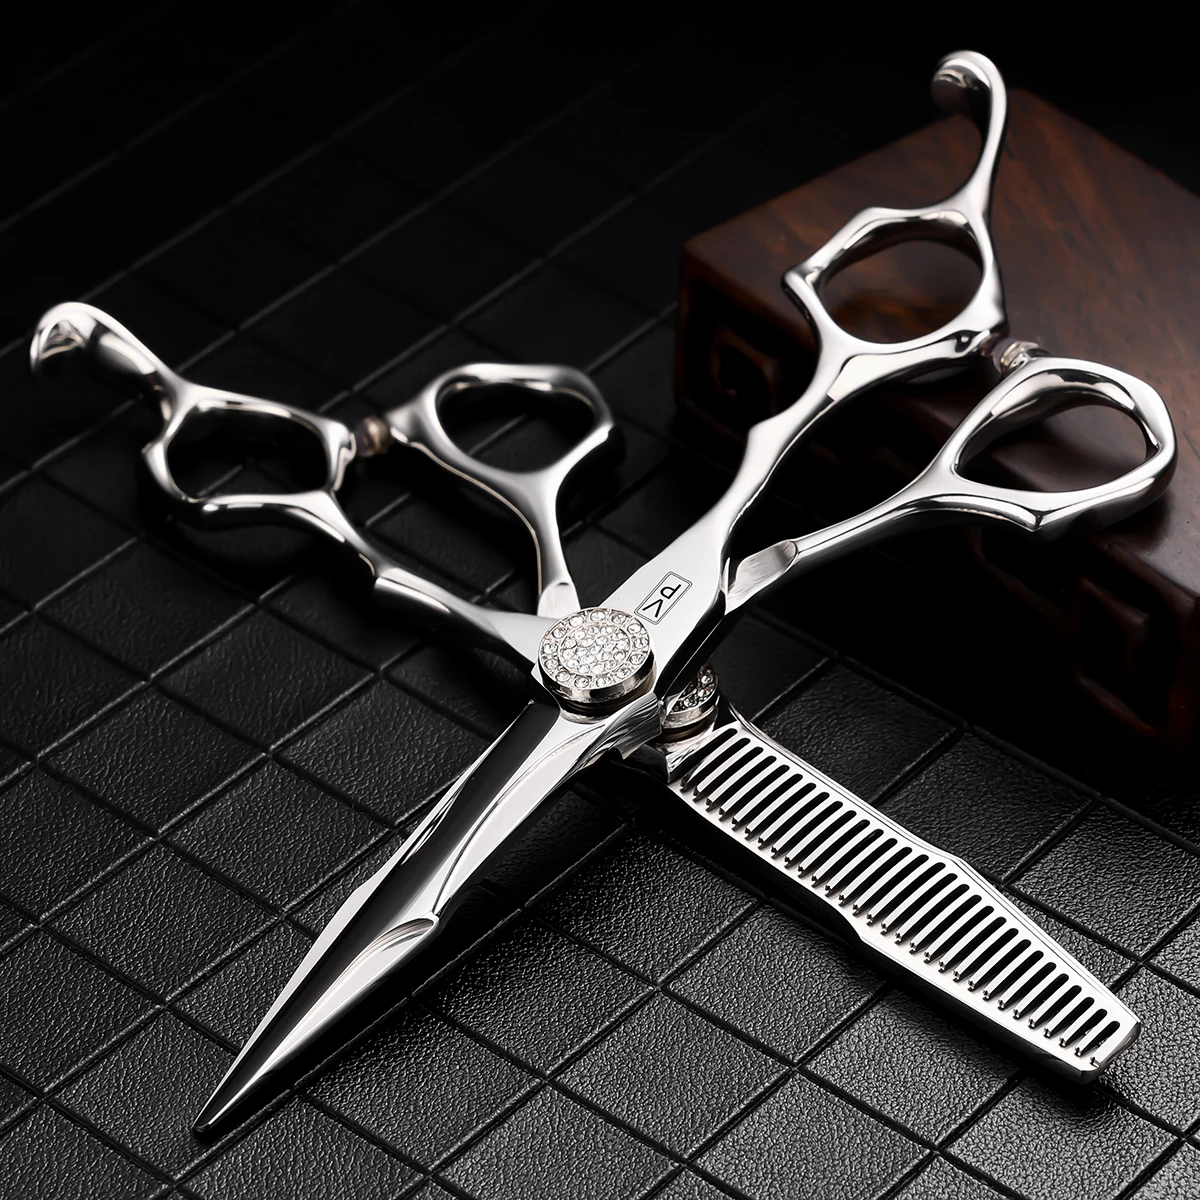 https://ae01.alicdn.com/kf/S253a4f9cafb4460697532e7df3becadcW/VP-Professional-Hairdresser-Scissors-Hair-Cutting-Tools-Barber-Shears-Hairdressing-Thinning-Scissors-Of-6-0Inch-Japan.jpg